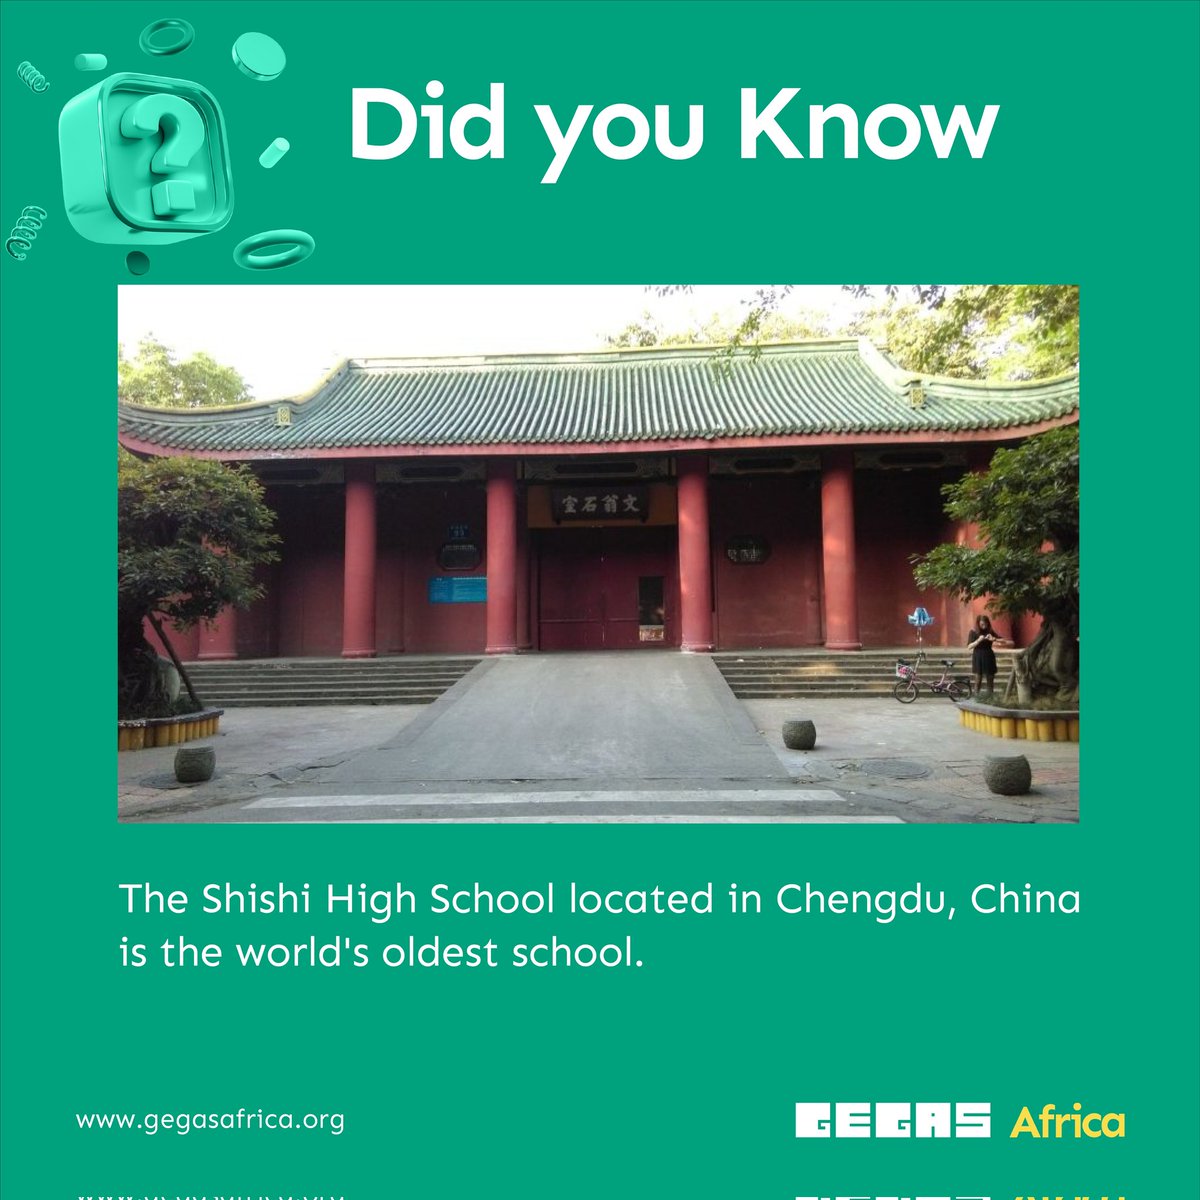 Established in 194 AD, earning the title of being the world's oldest school comes with no surprise! The first Chinese public school to ever exist, became a modern school in 1902.